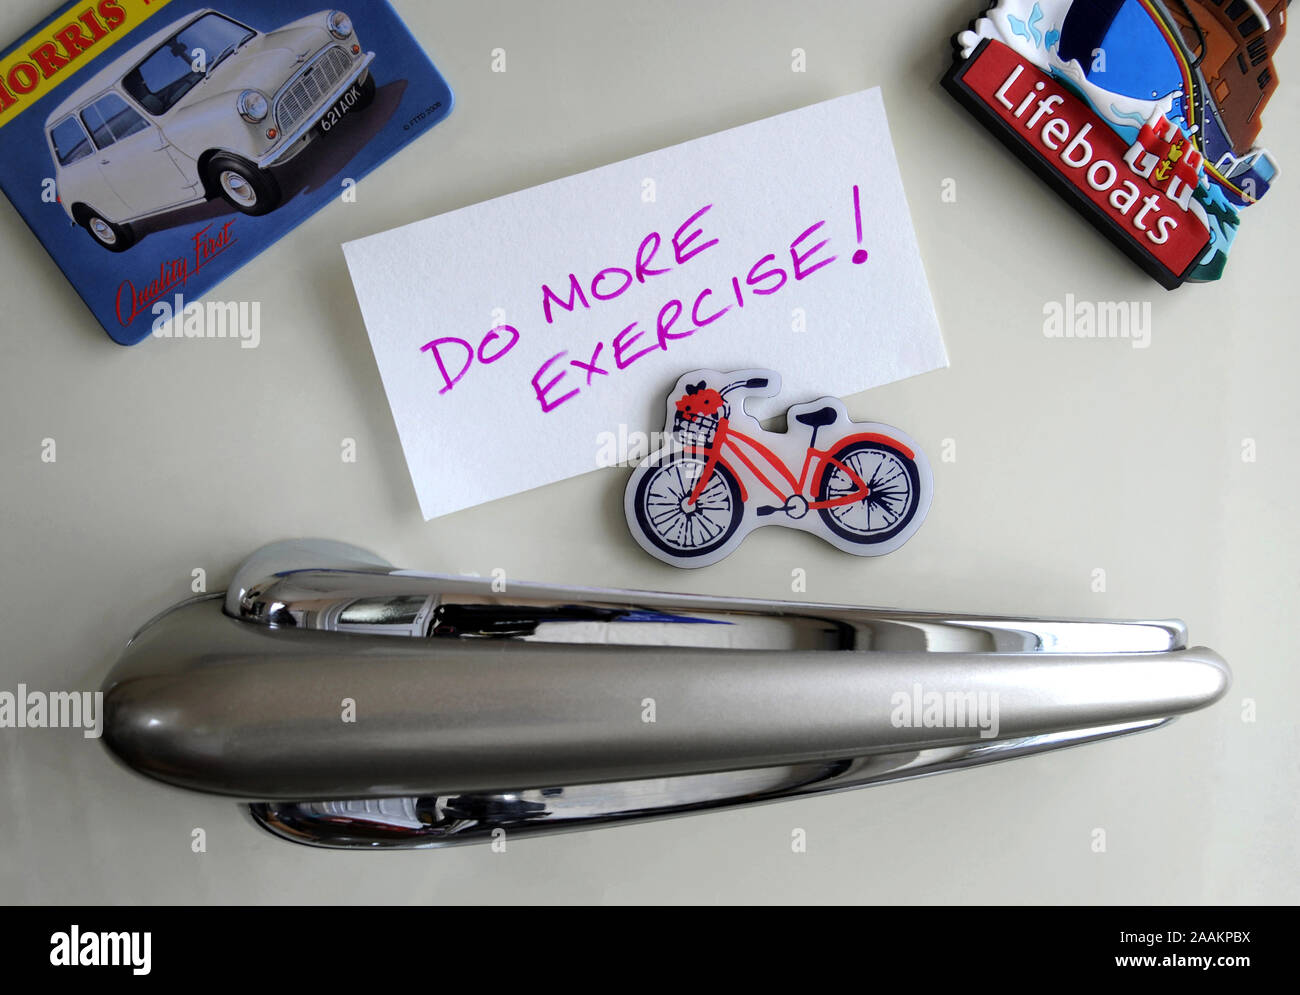 REMINDER NOTE ON FRIDGE DOOR READING DO MORE EXERCISE! WITH BICYCLE FRIDGE MAGNET RE HEALTH EXERCISE FITNESS OBESITY GETTING FIT WEIGHT ETC UK Stock Photo